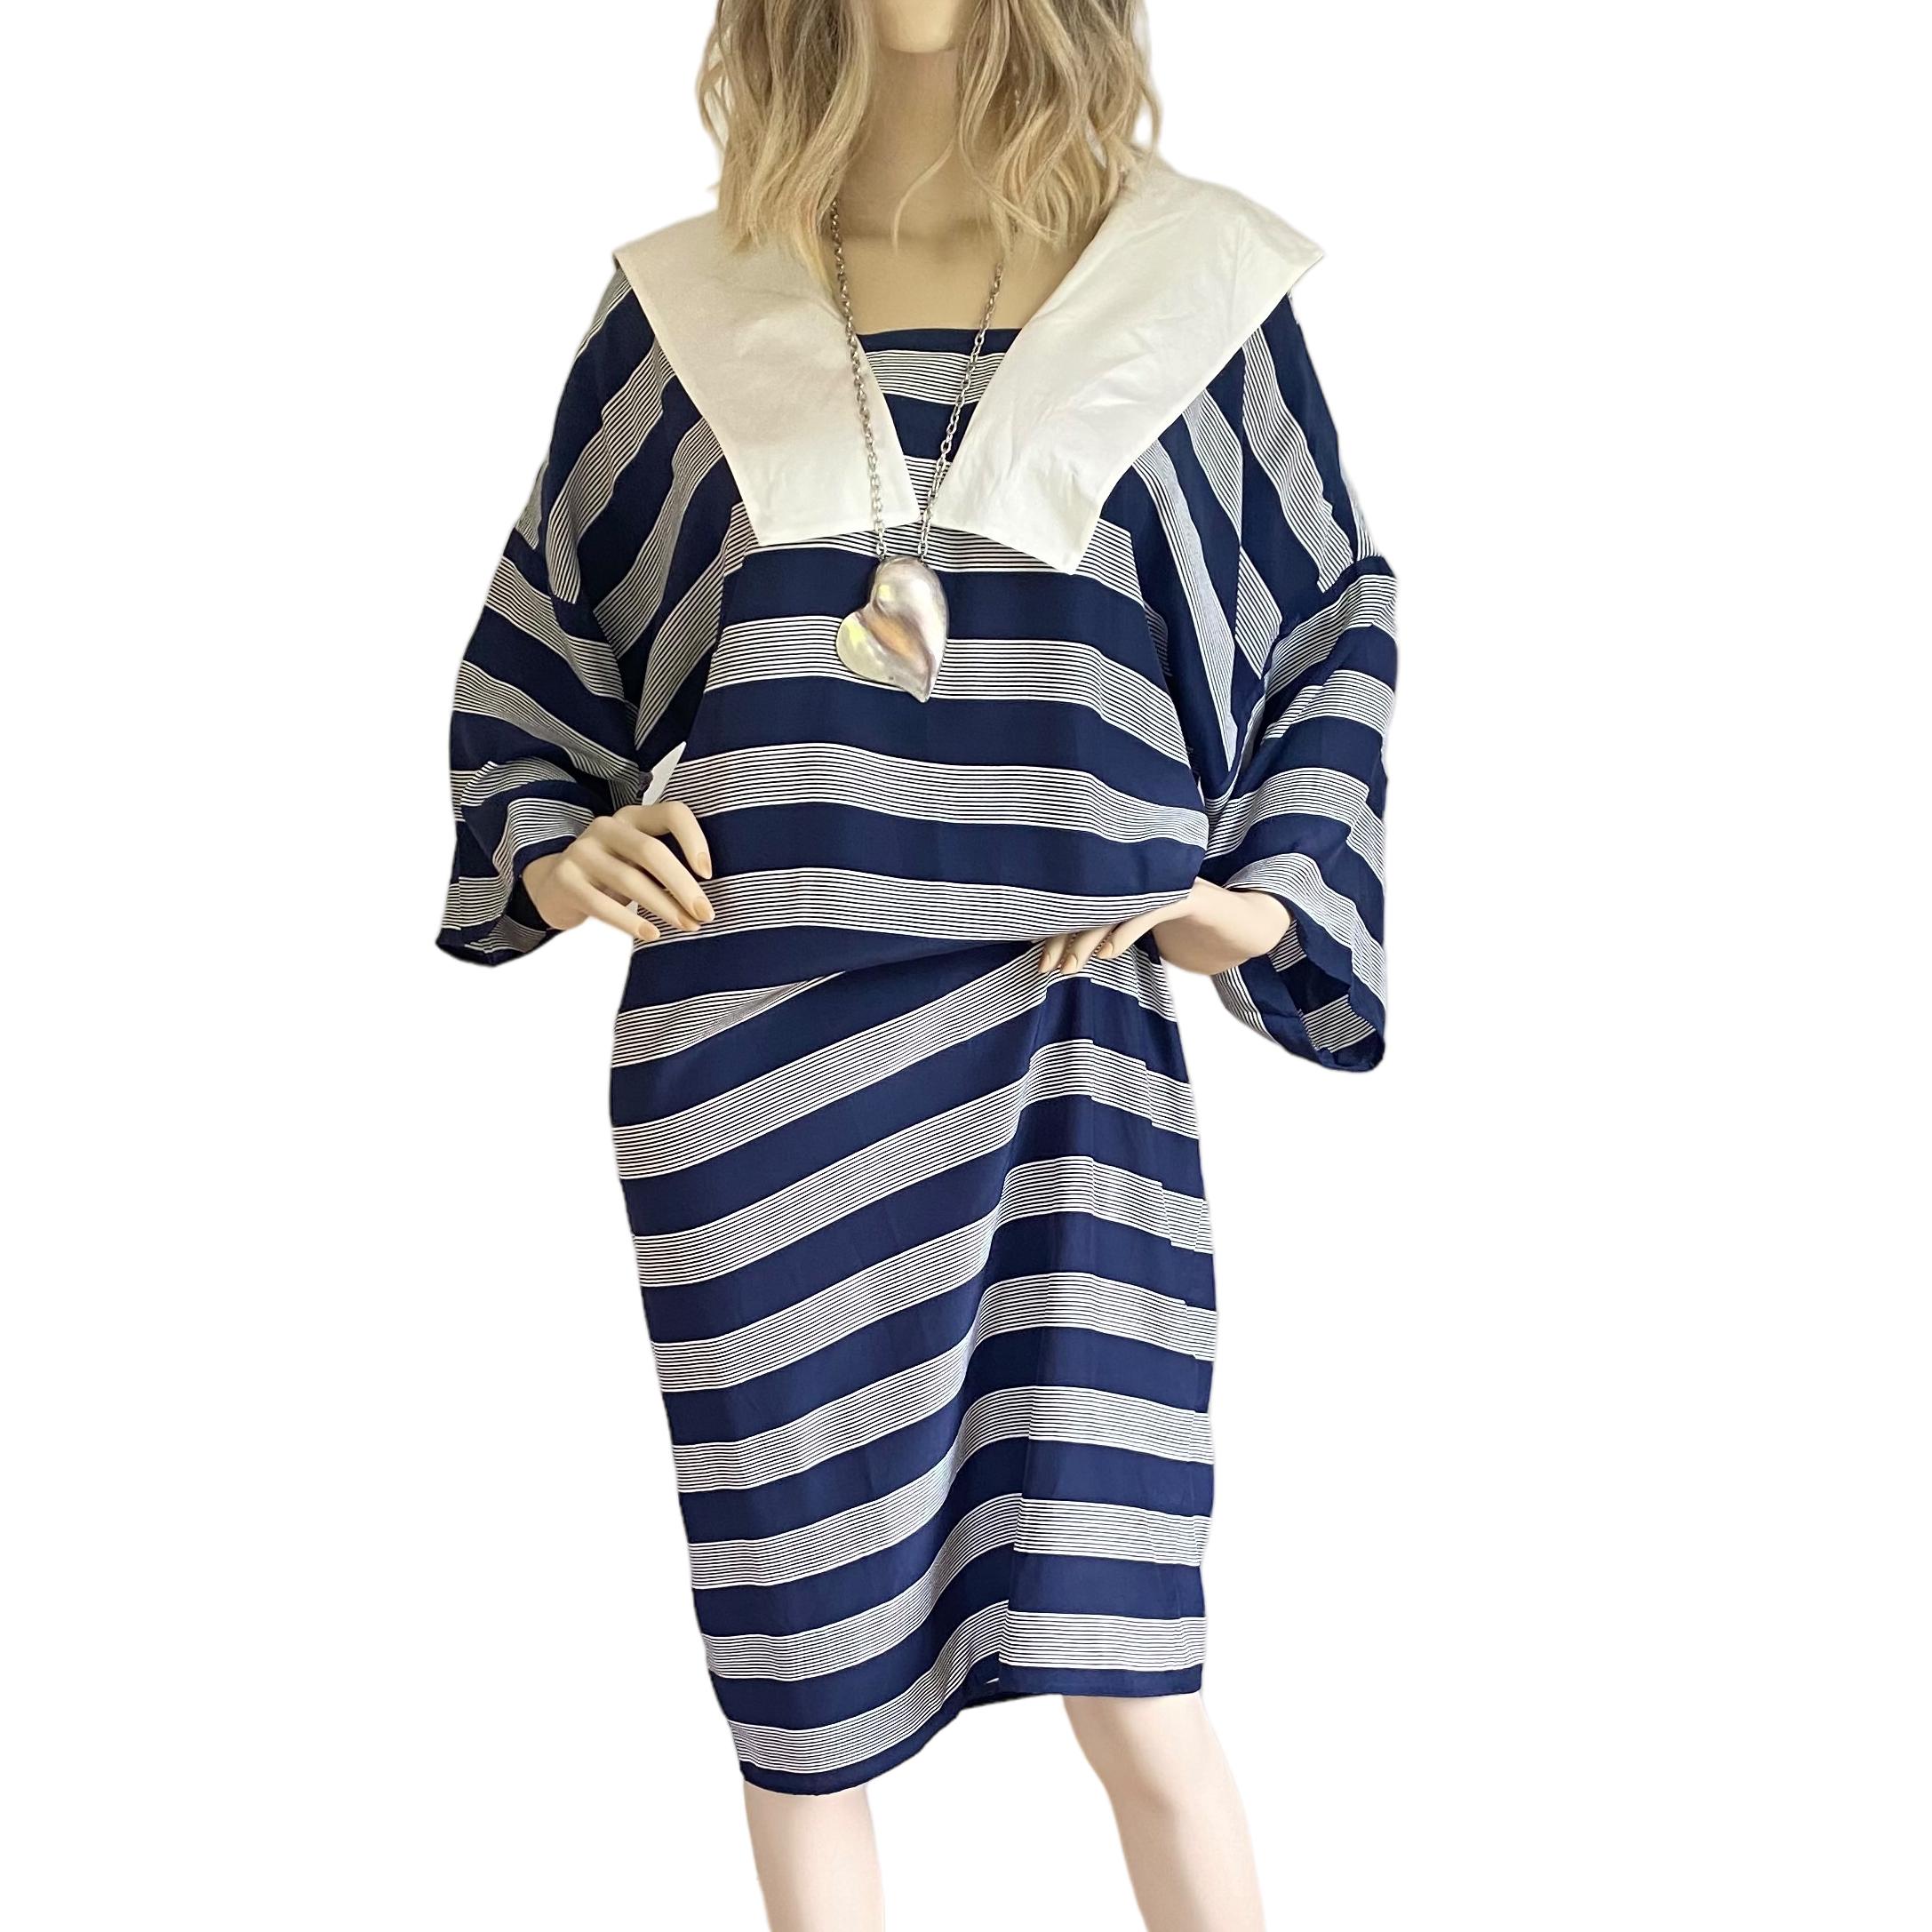 Loose fit, cool stripe sailor Marina dress.
Perfectly matched stripes at each side seam - a sign of Flora's attention to detail and no expense spared.
Pulls over head, comfort fit. Perfectly chic and easy to accessorize.
Fabric: long-filament silk